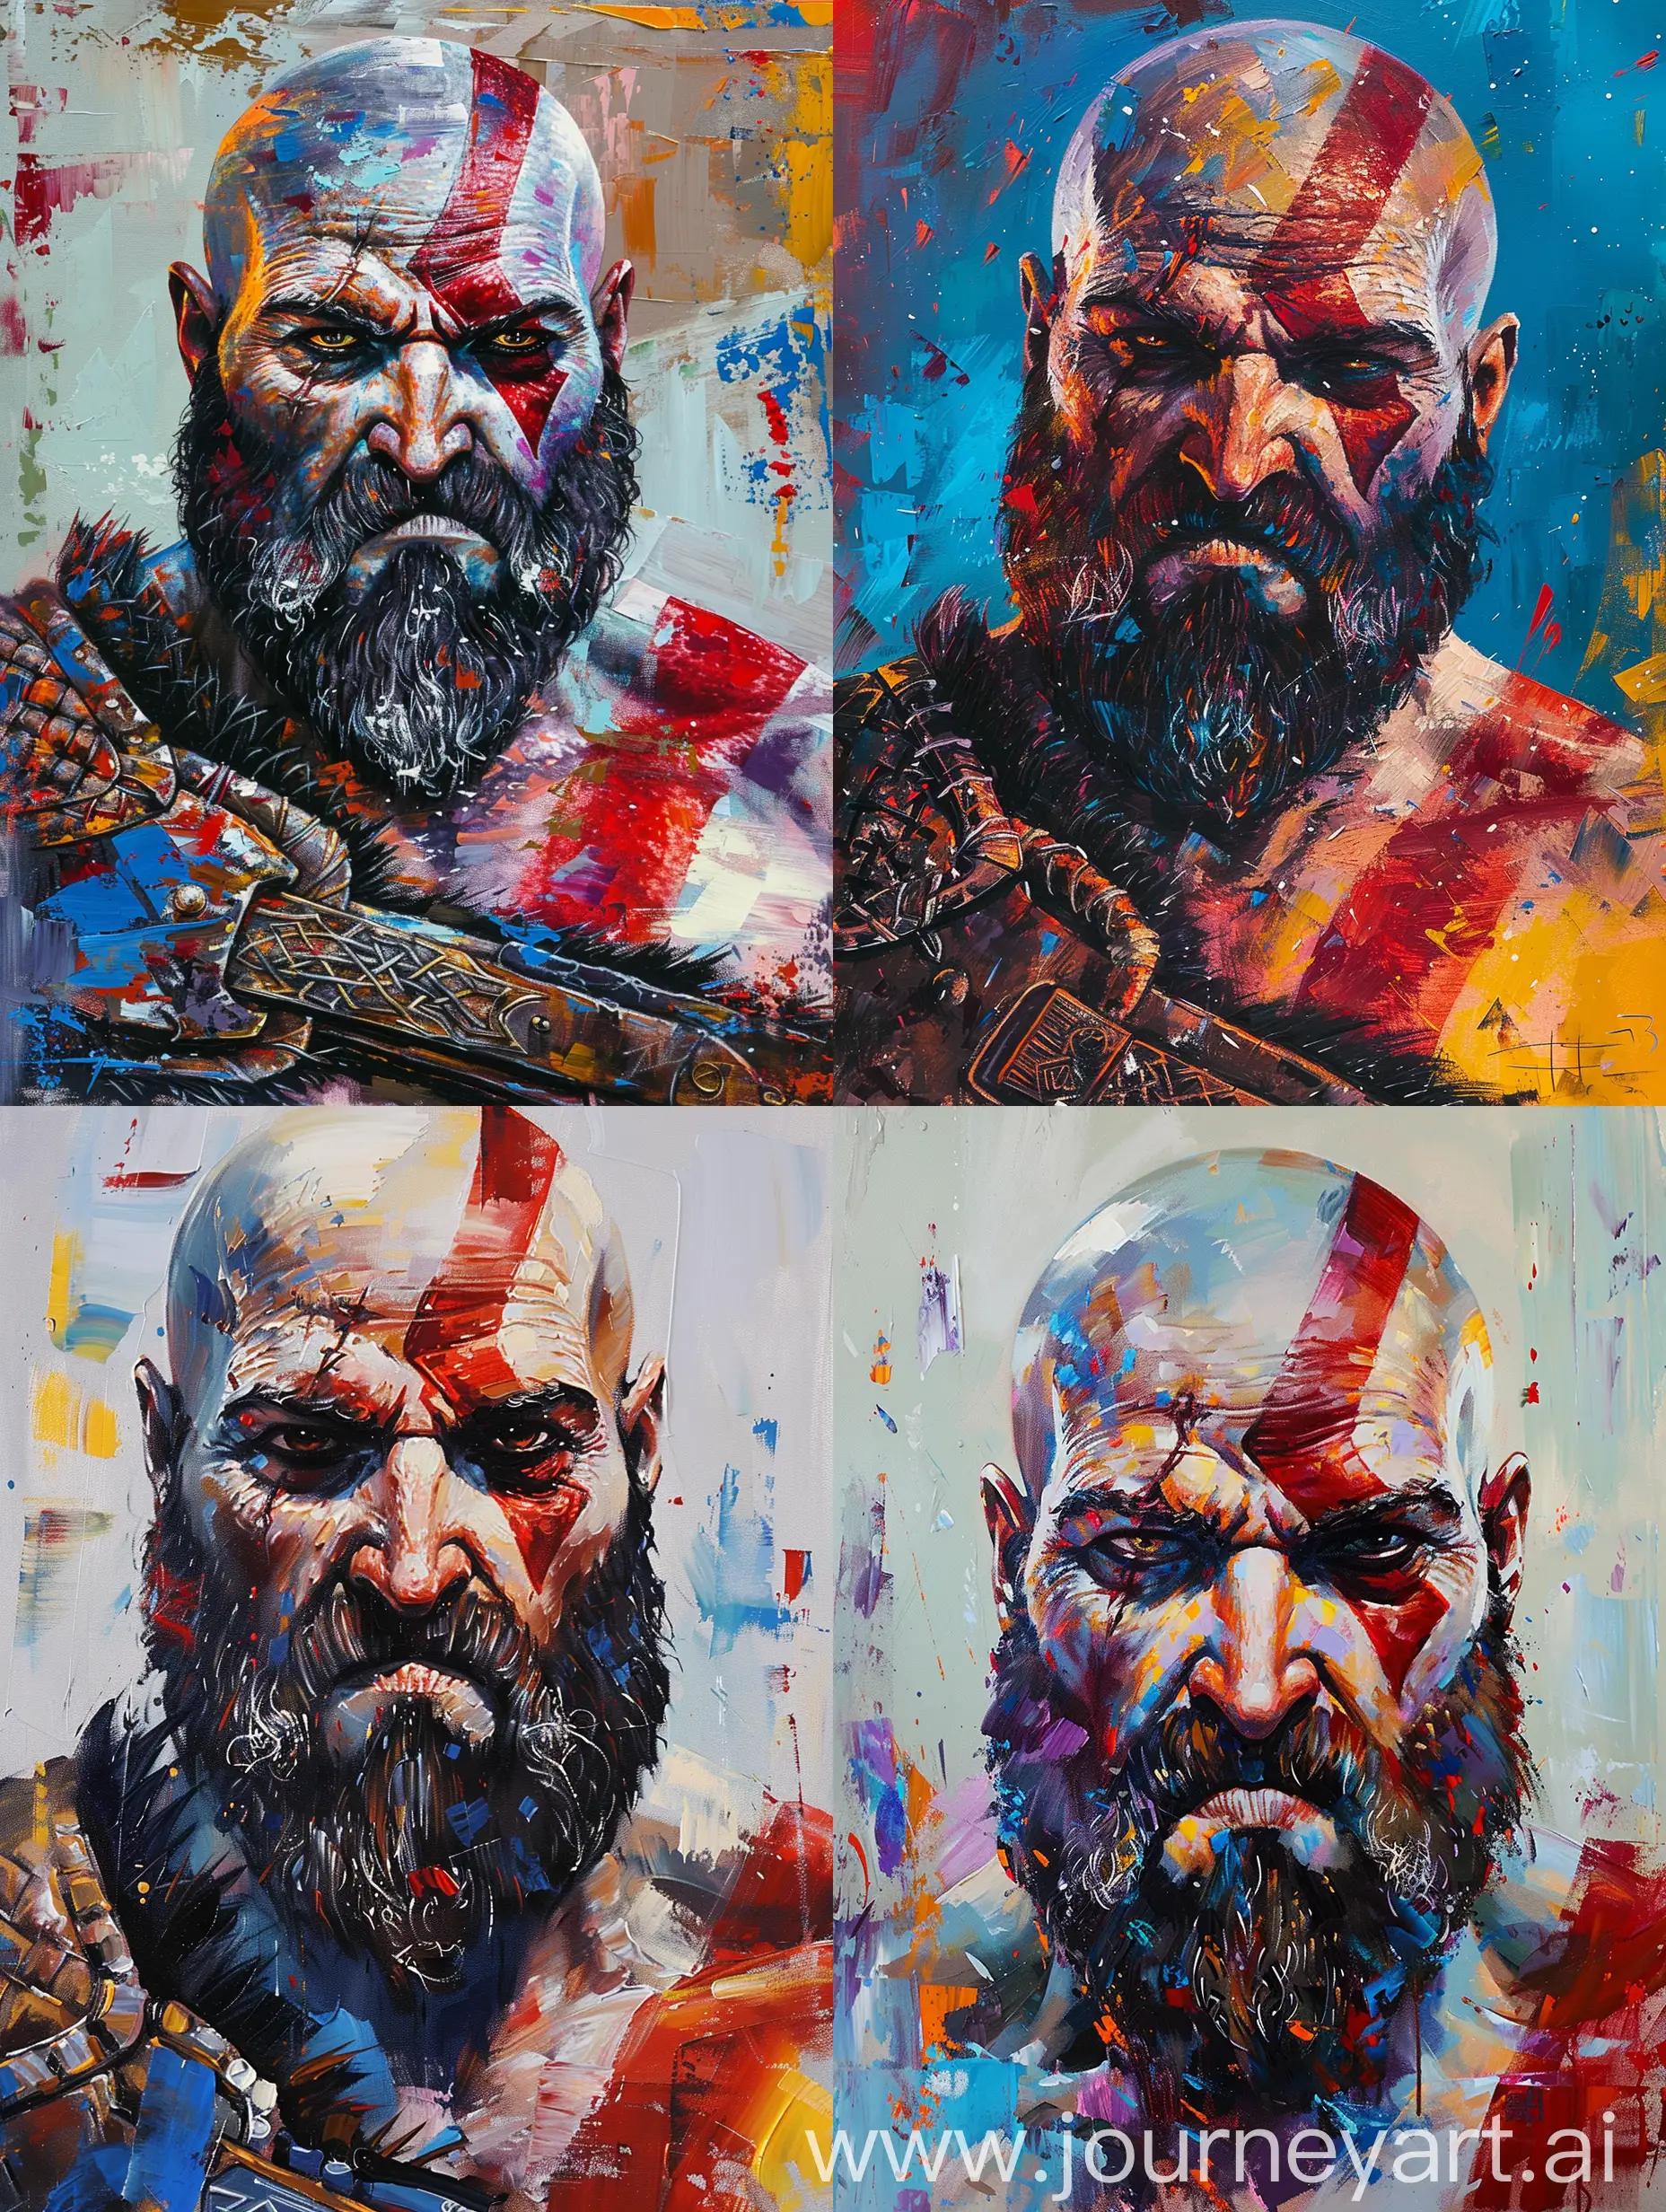 oil painting of kratos of god of war in star wars style with a bright color palette in high details with visible brush stroked
--c 3